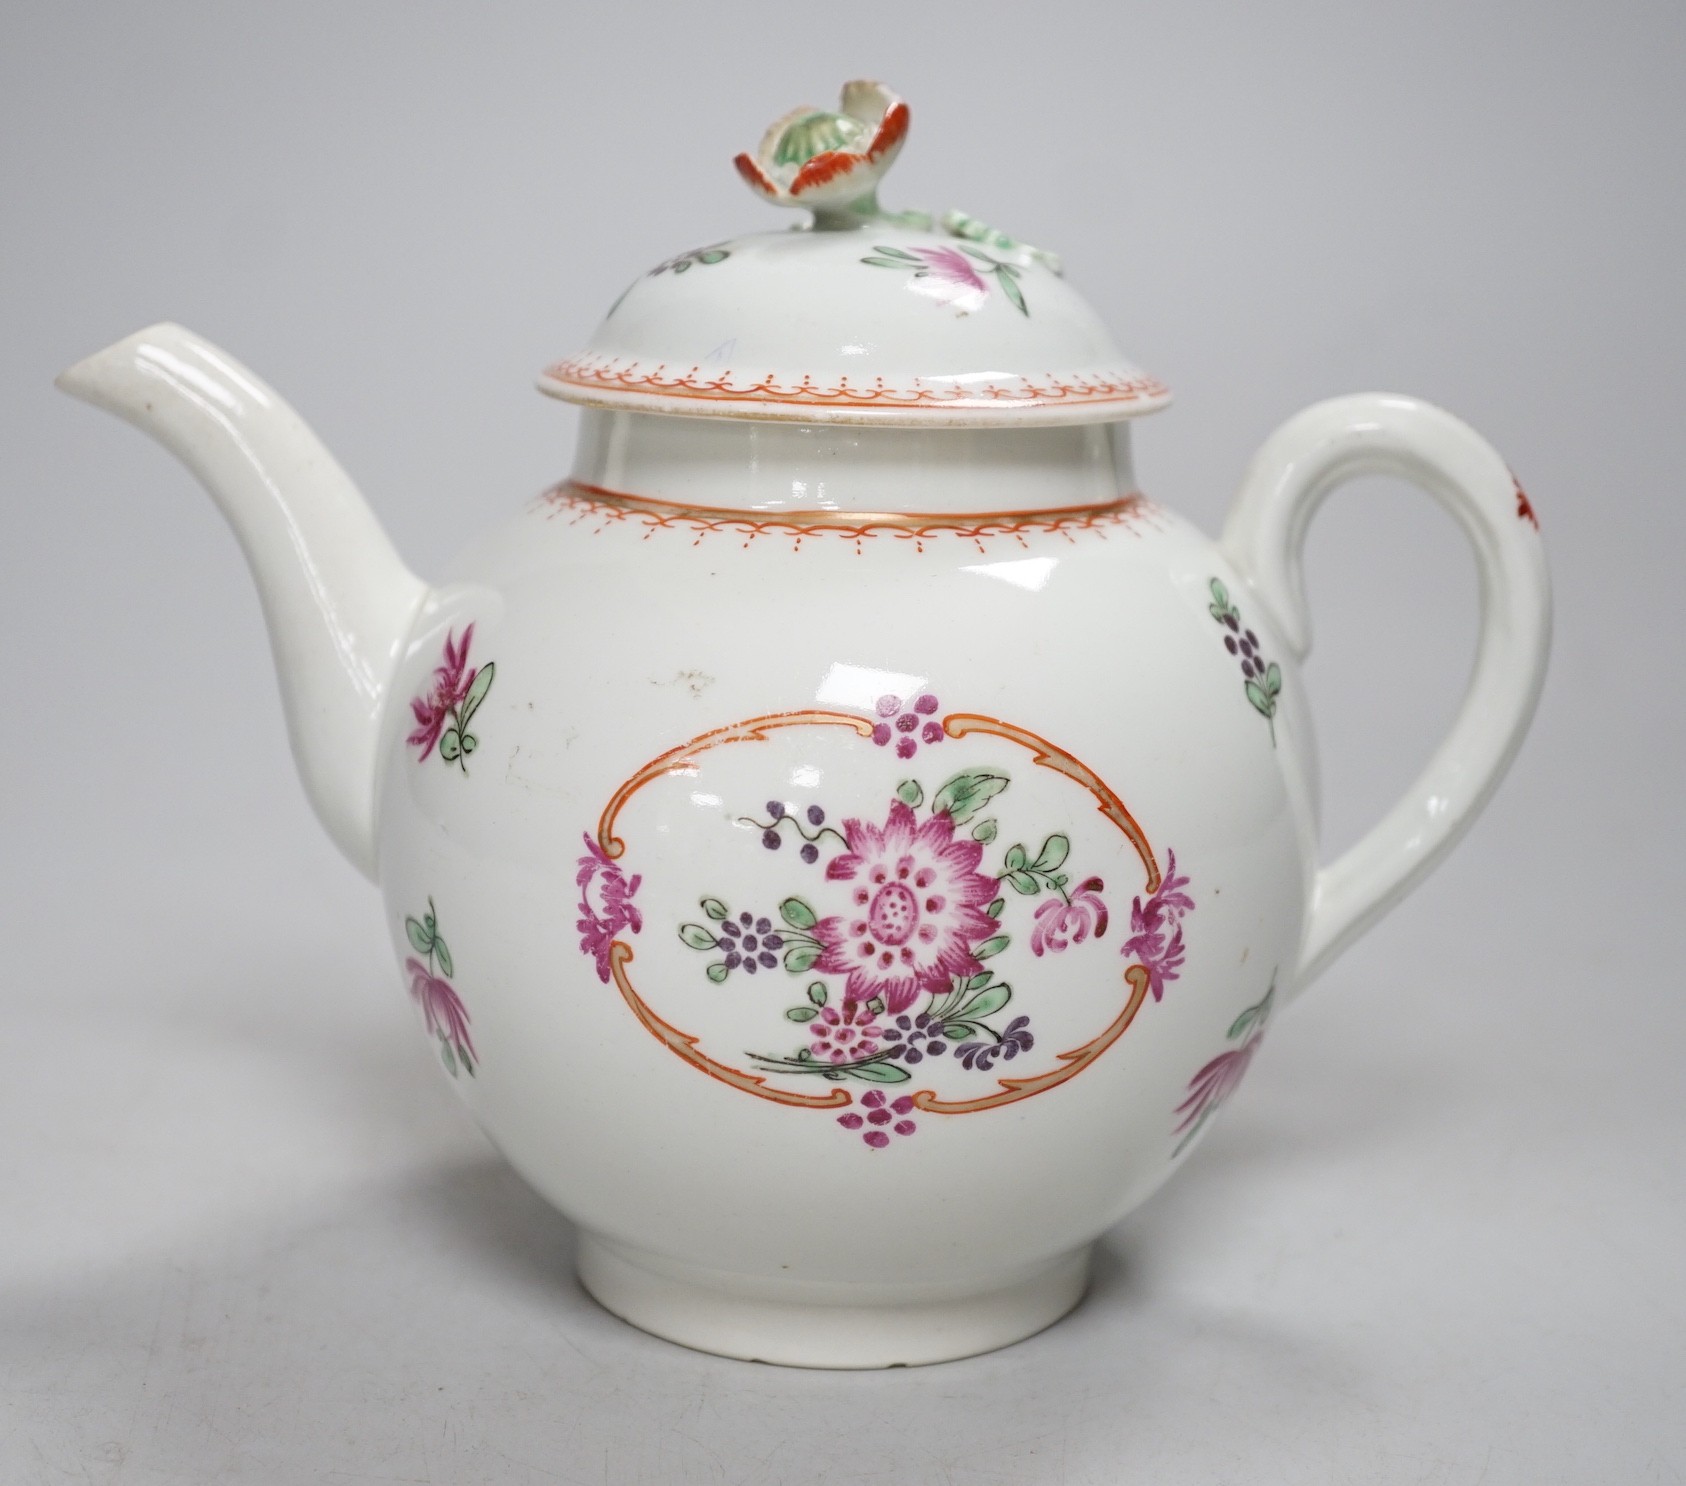 An 18th century Worcester teapot and cover painted in Chinese export style with flowers in an oval panel. 16cm tall